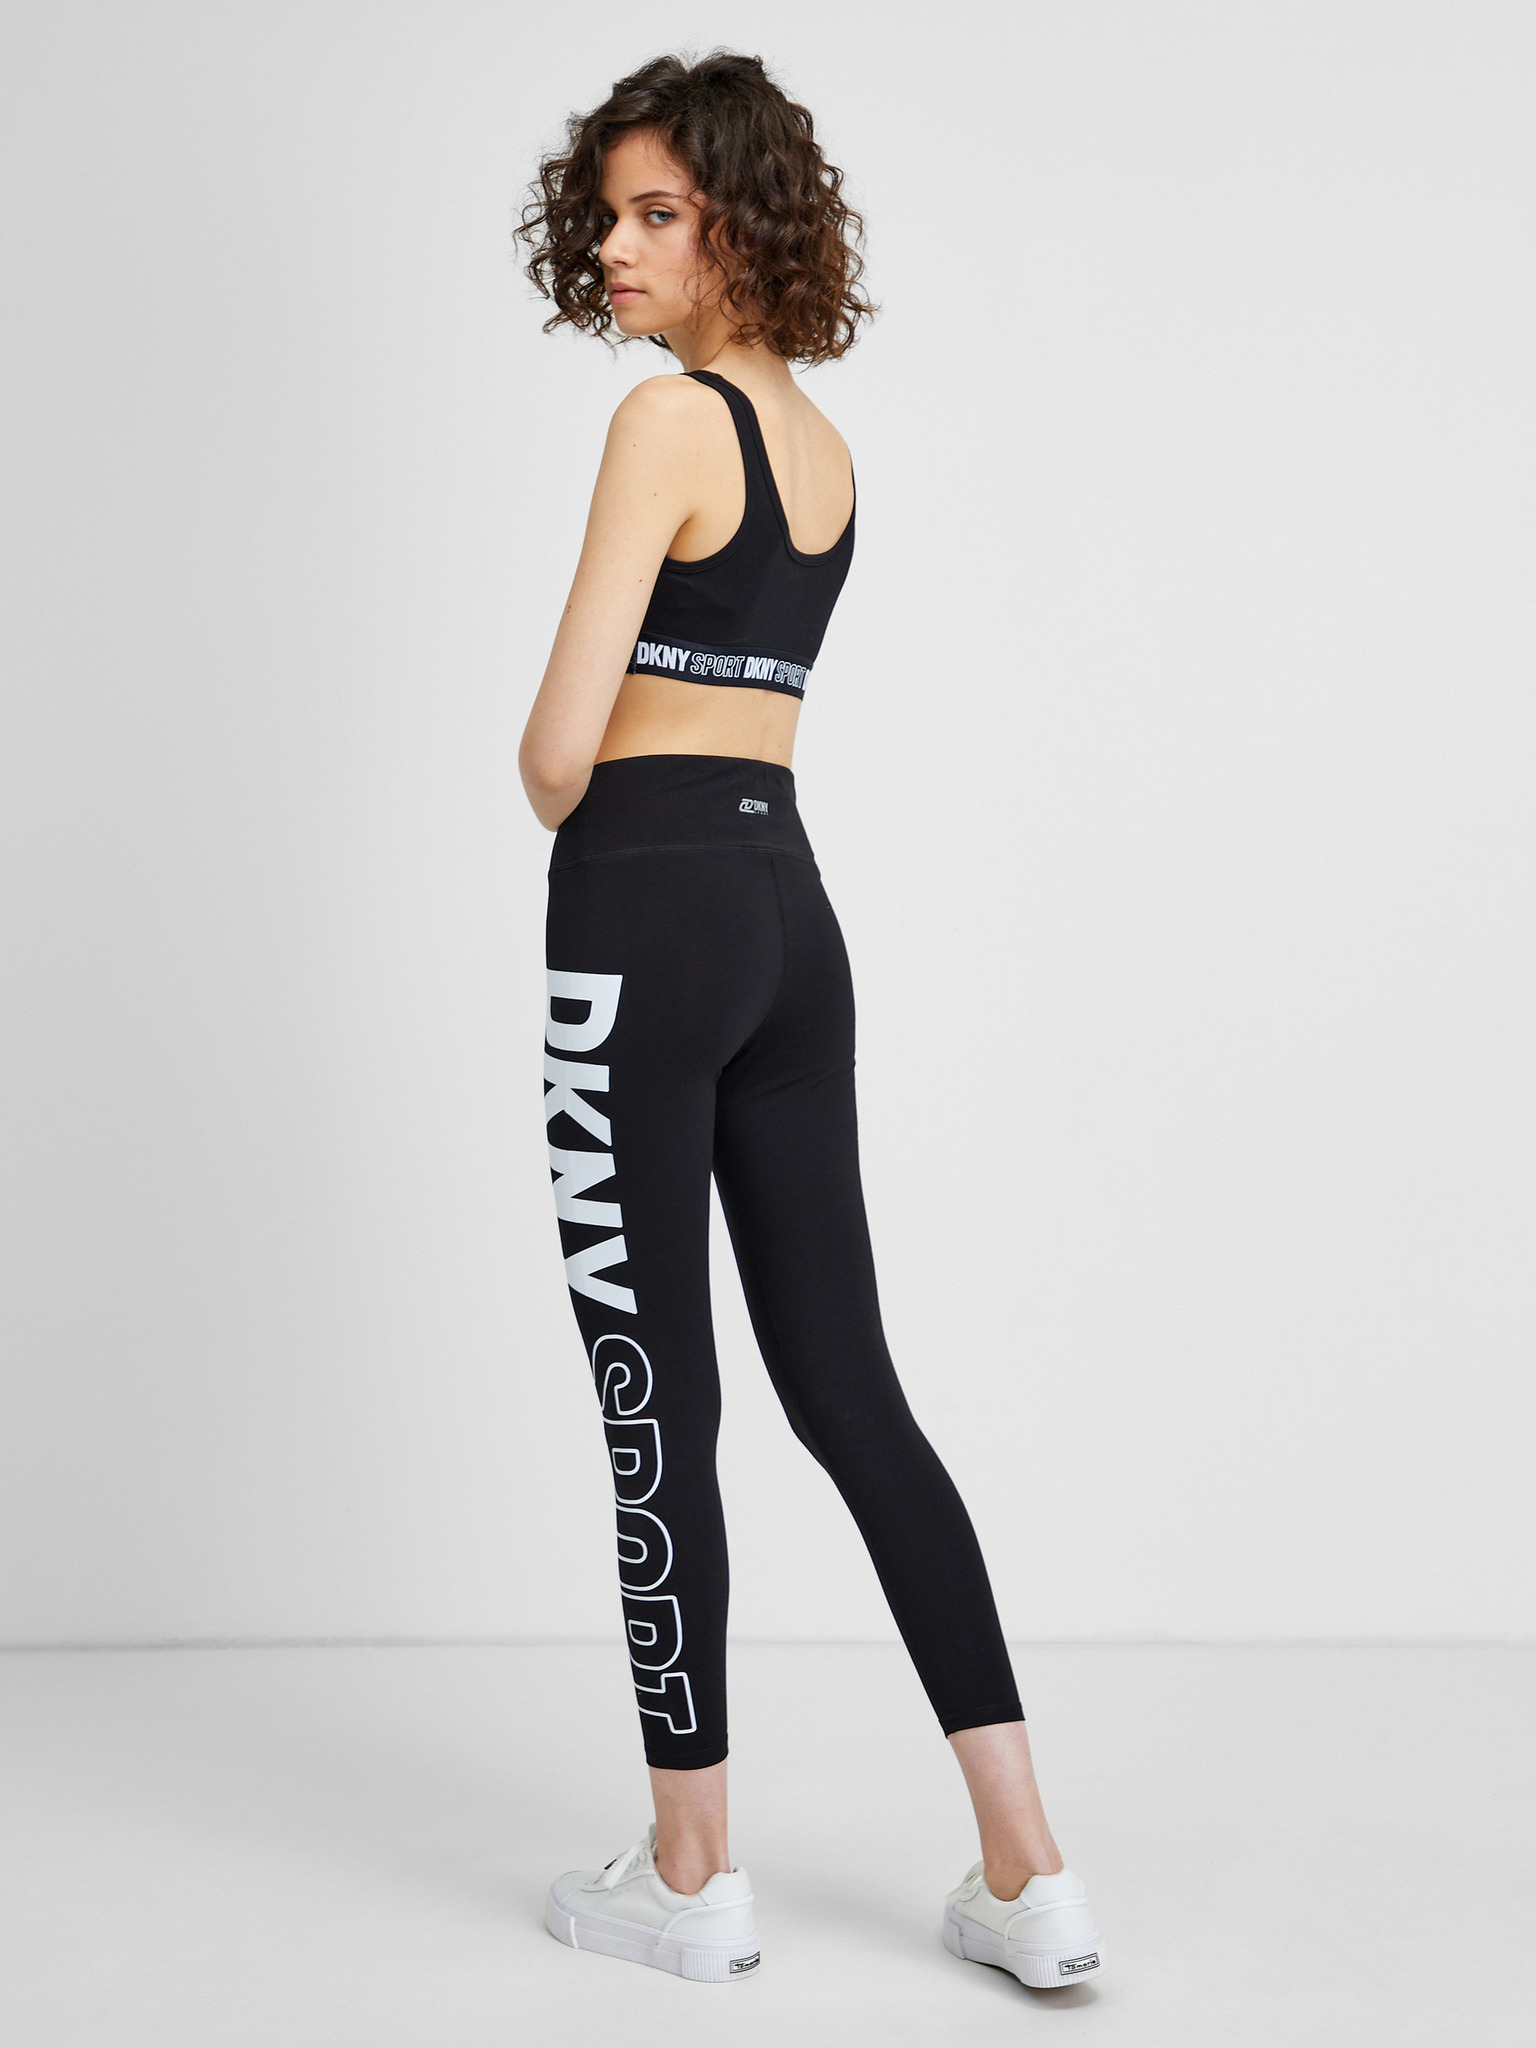 Dkny Sport High Rise 7/8 Legging With Logo Side Seam Print | Pants & Capris  | Clothing & Accessories | Shop The Exchange